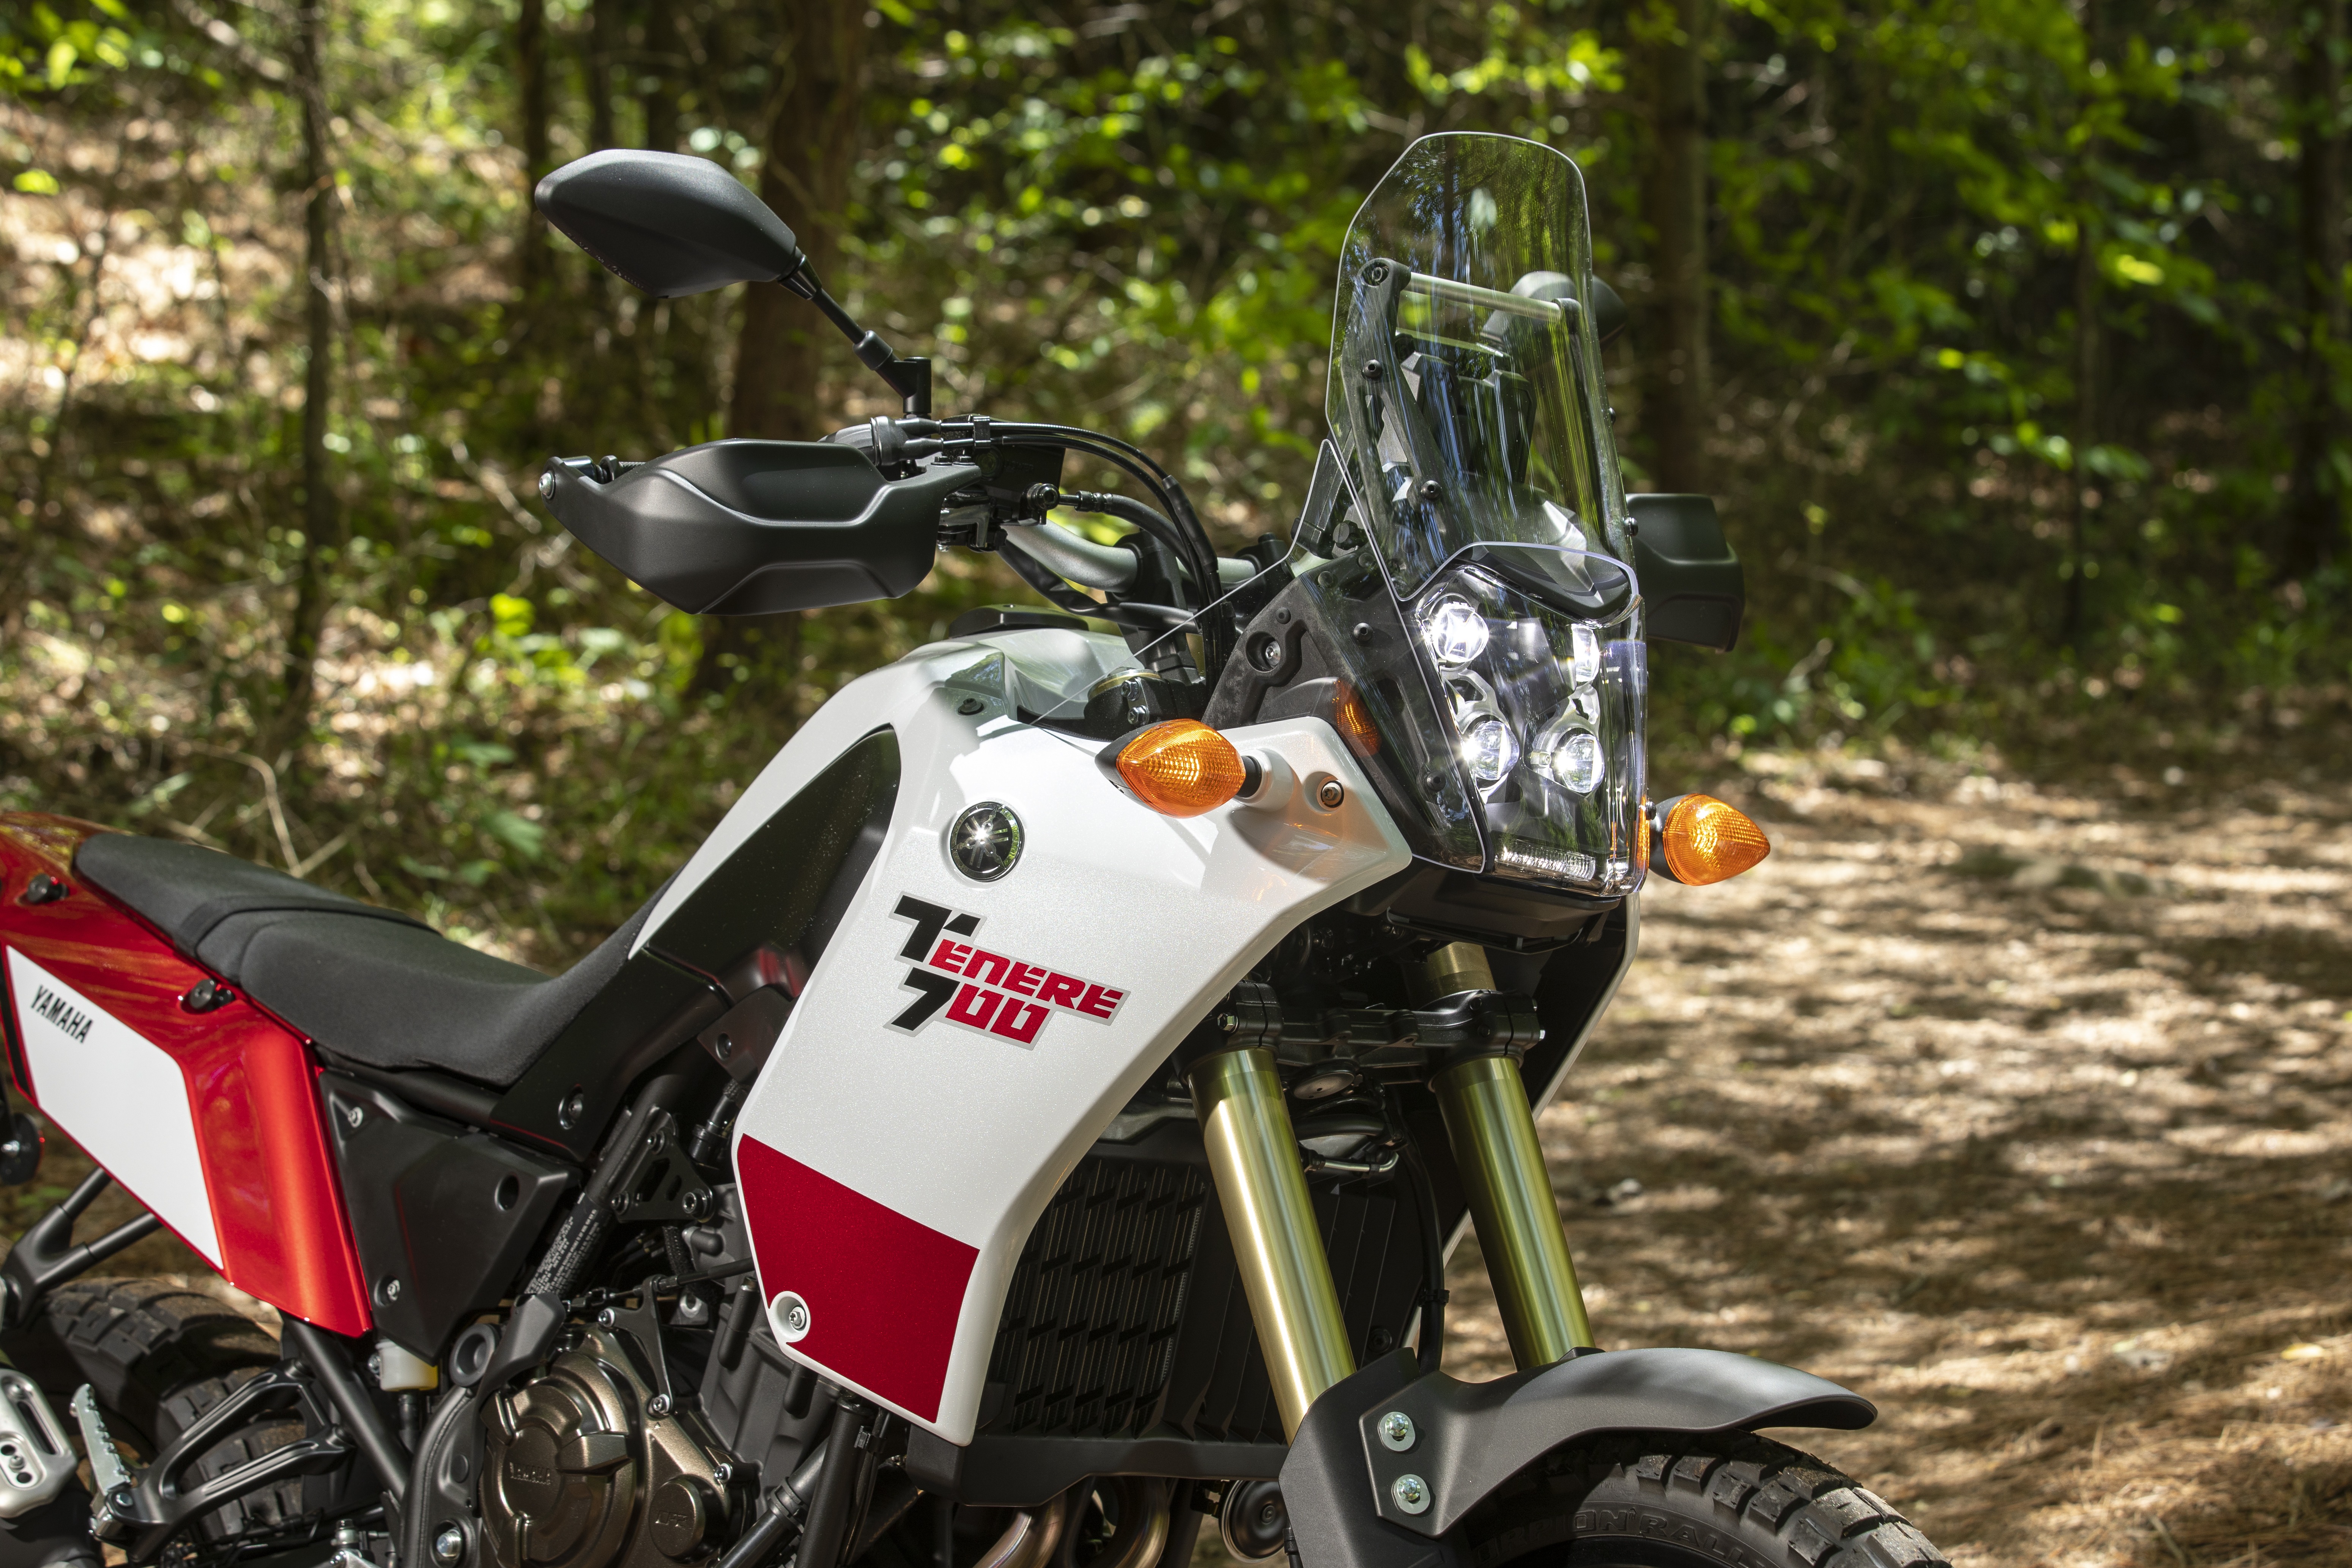 2021 Yamaha Tenere 700 Review: The Good and the Bad